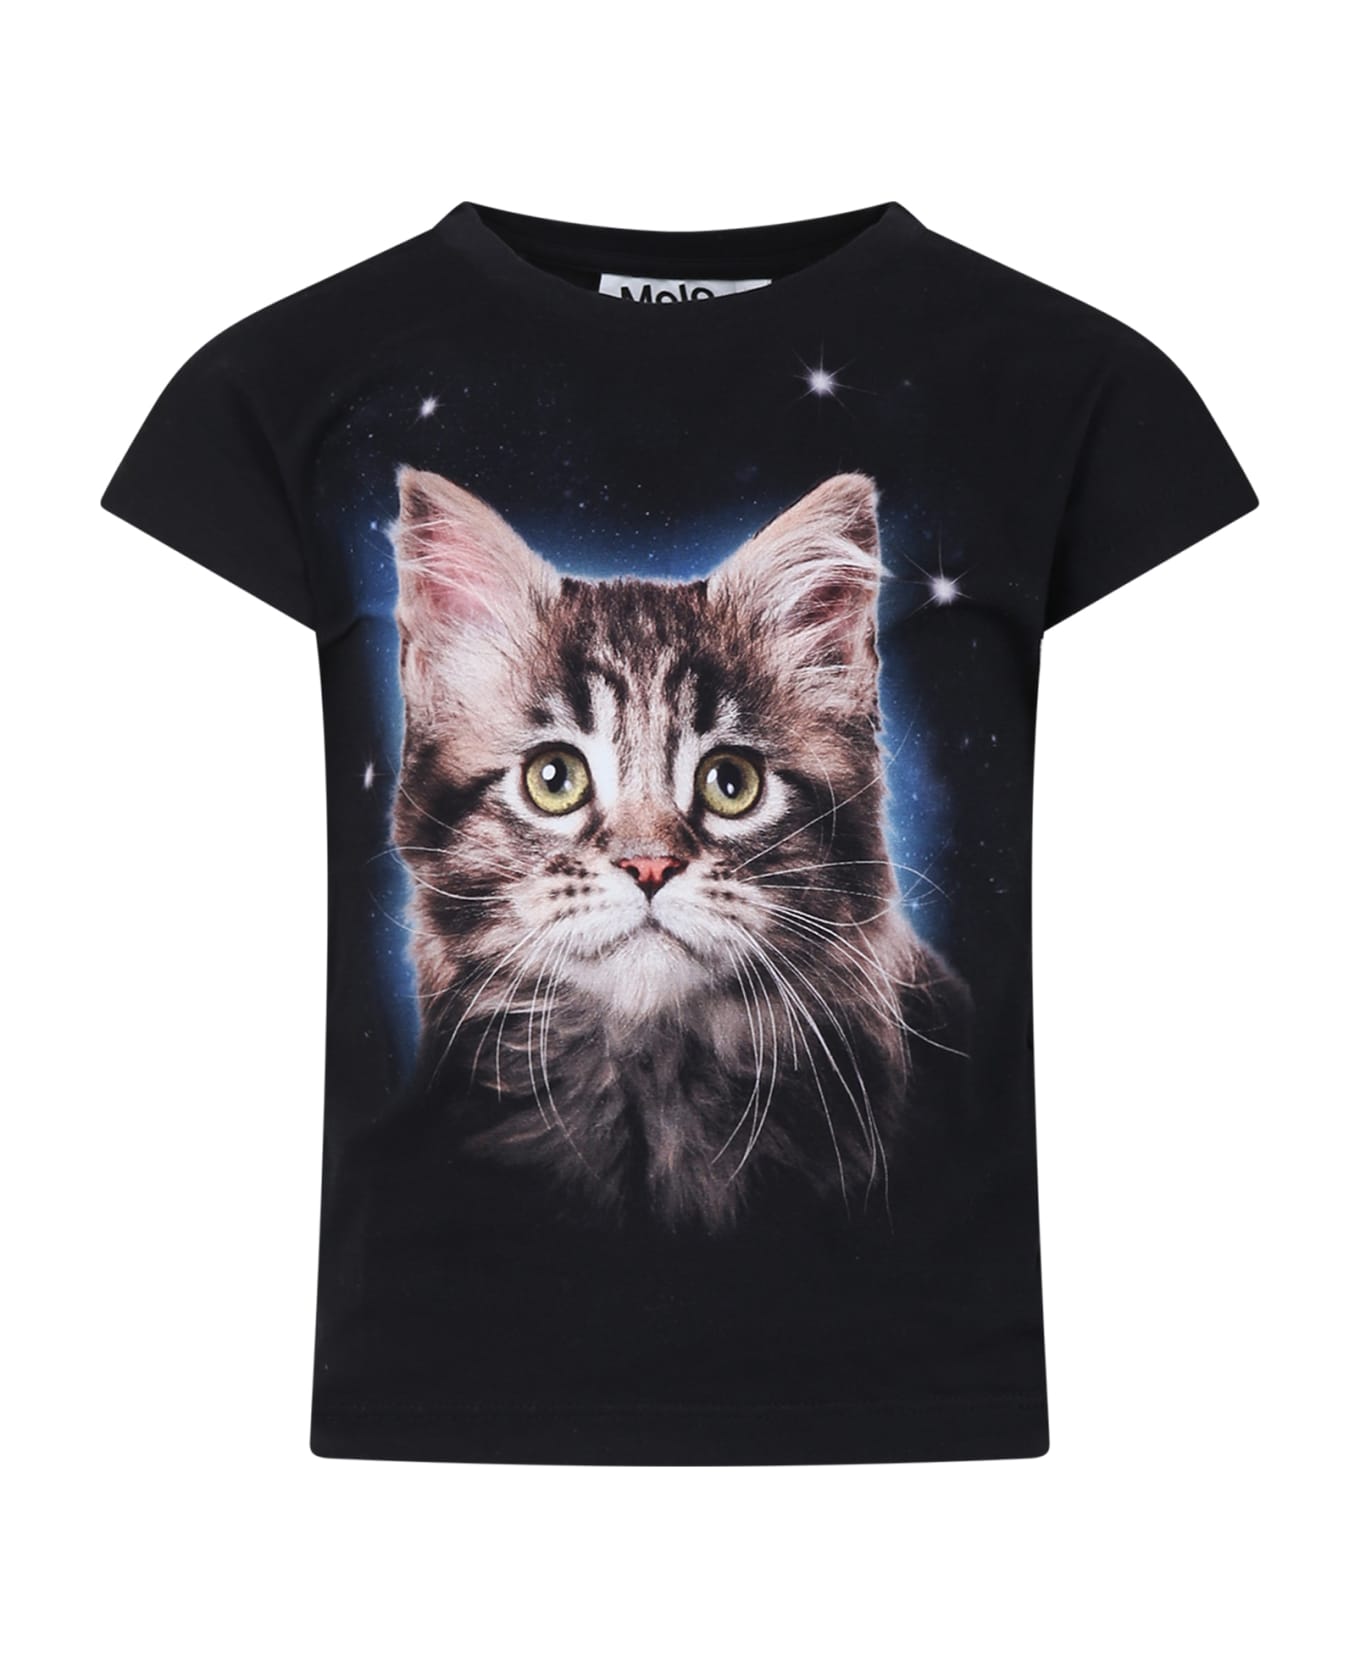 Molo Black T-shirt For Girl With Cat Print - Black Tシャツ＆ポロシャツ